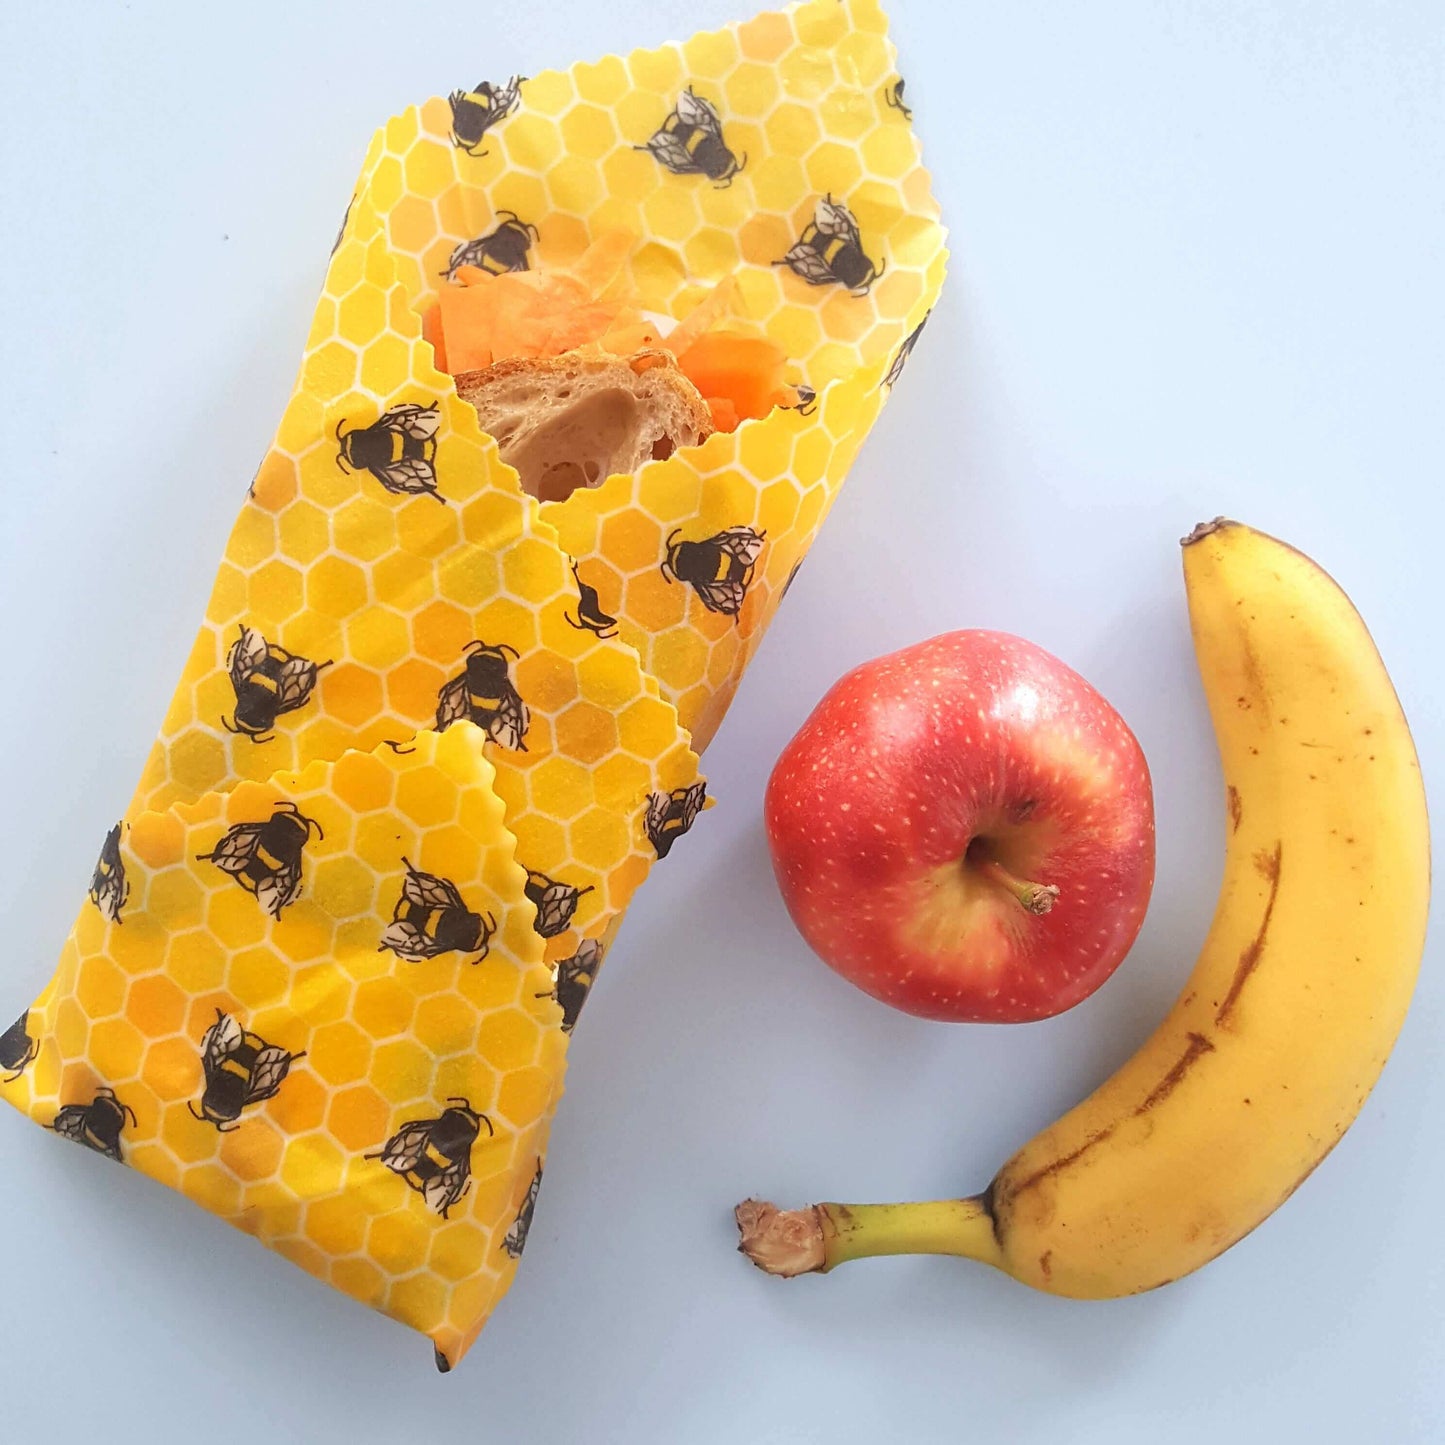 Planet-Kind single large beeswax wrap in Yellow Bees pattern as flatlay